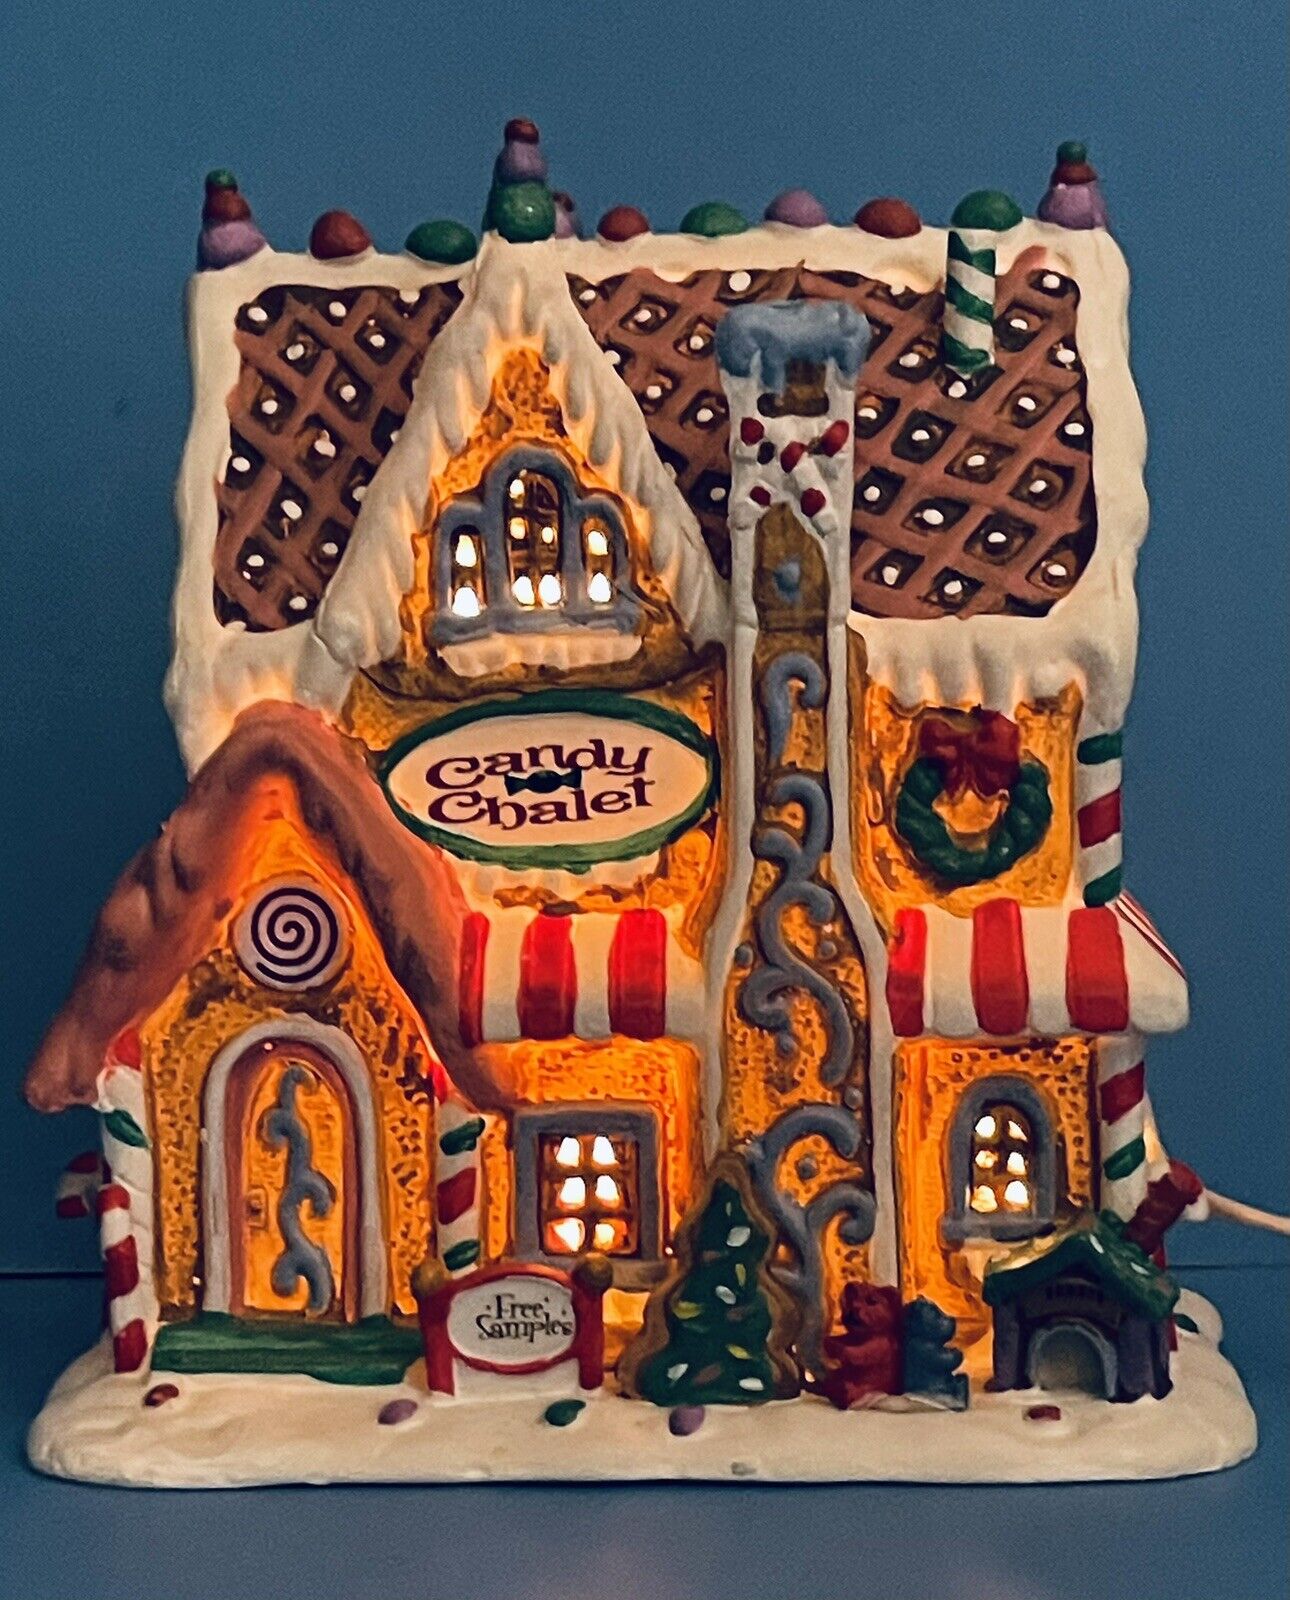 LEMAX MICHAELS EXCLUSIVE ..CANDY CHALET/GINGERBREAD HOUSE 8” H X 5” W X 7.1/4” L